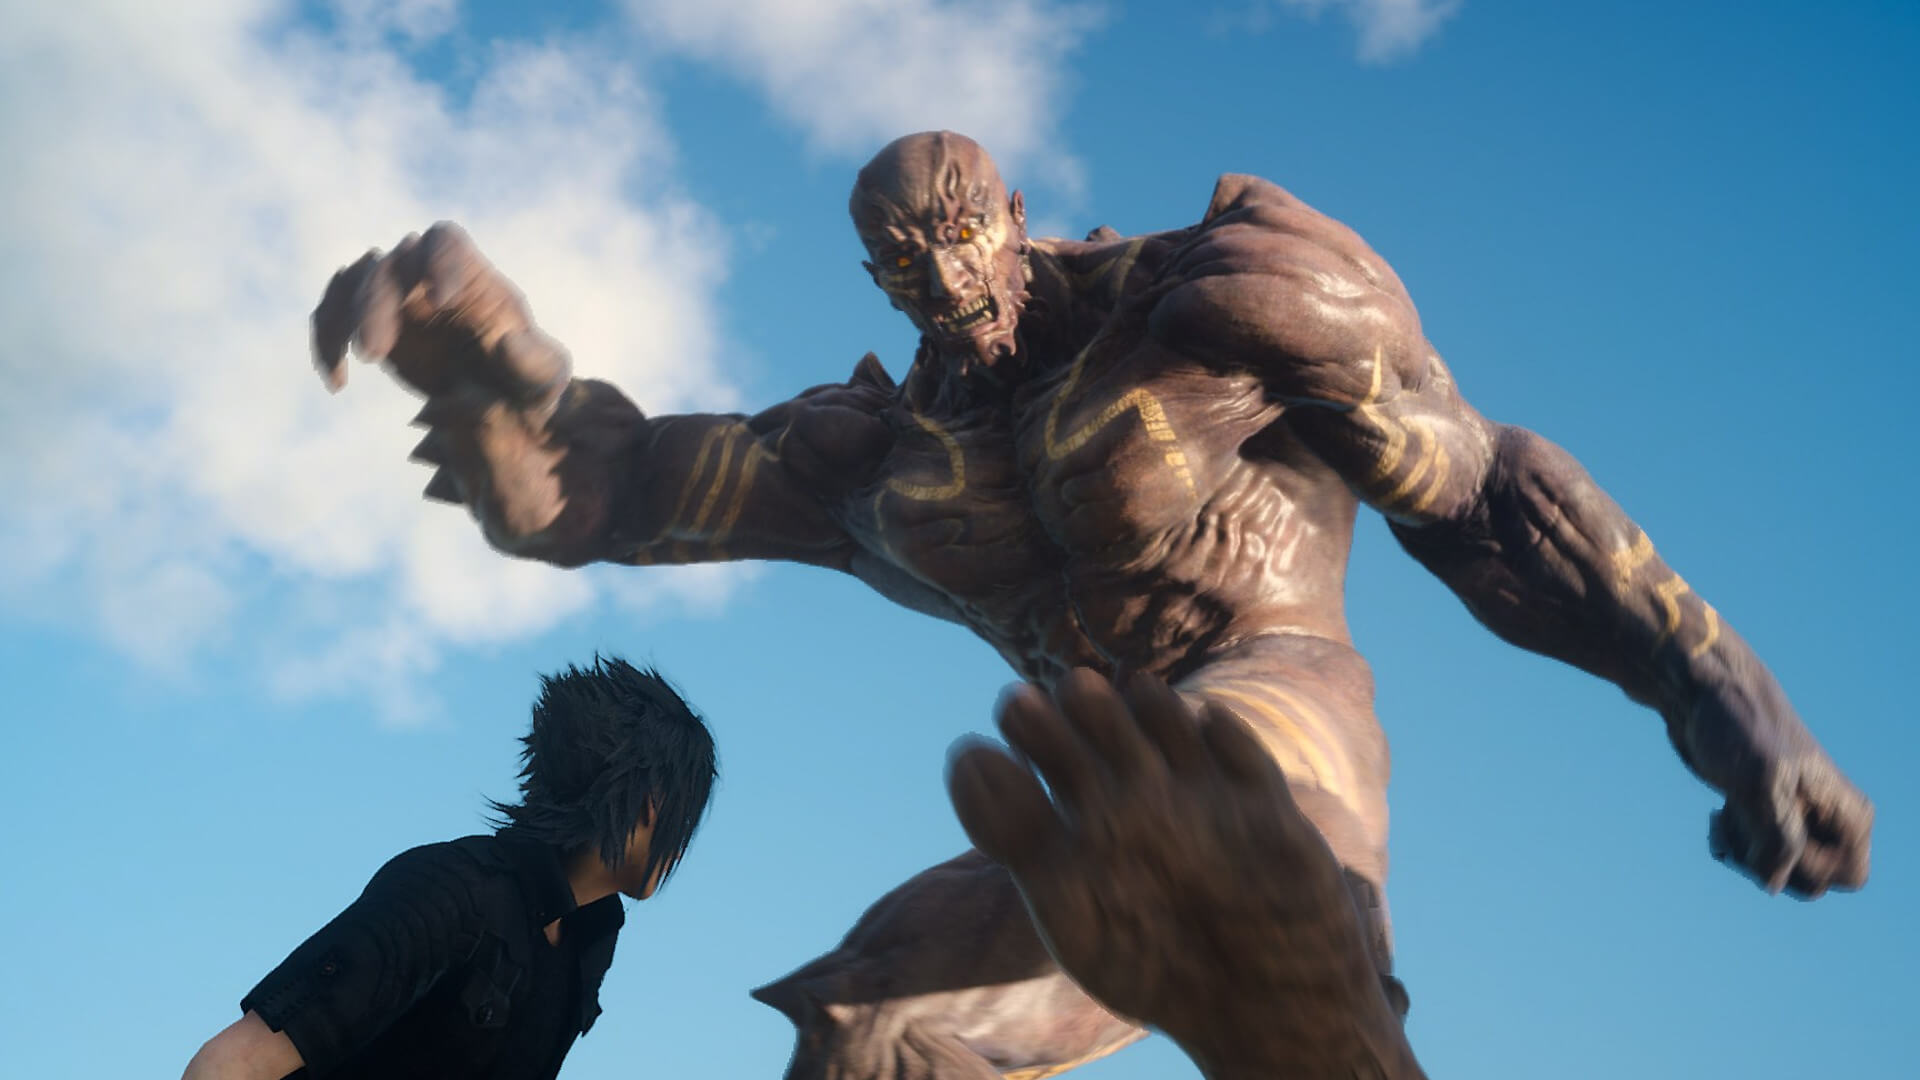 Titan about to crush Noctis with his foot in Final Fantasy XV